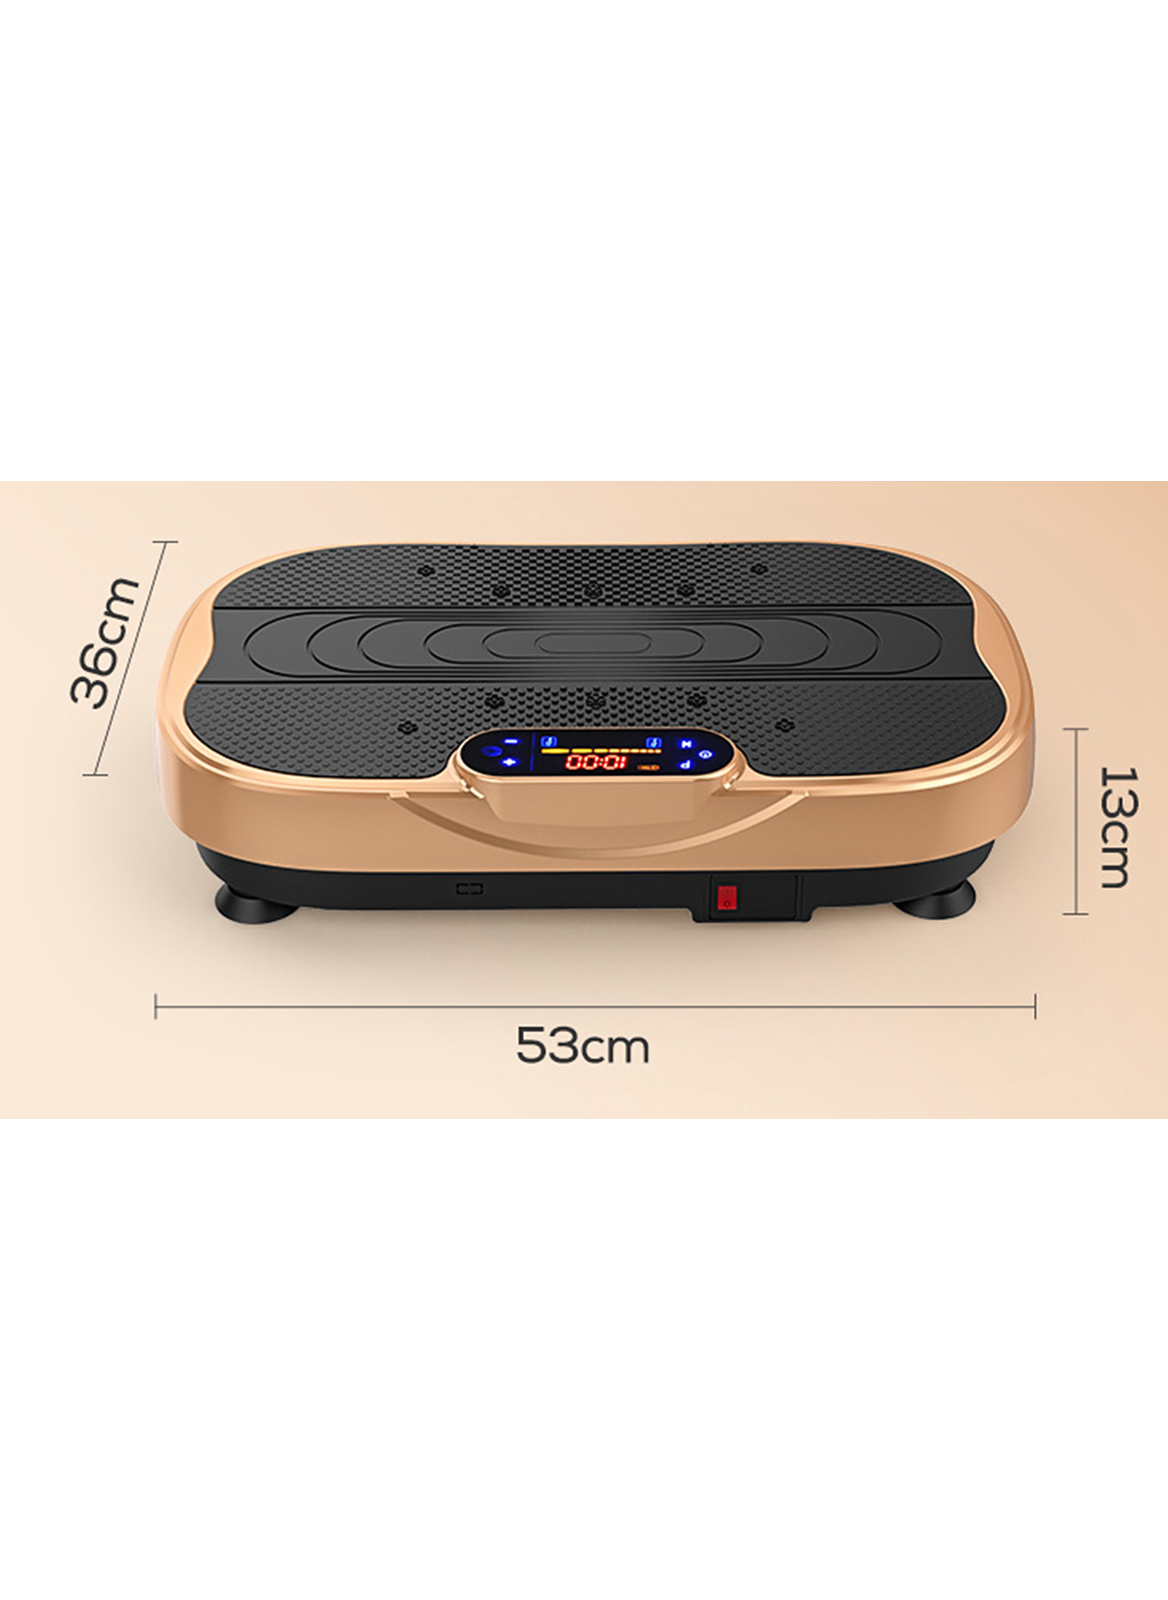 Vibration Plate Exercise Machine - Whole Body Workout Vibrate Fitness Platform with LCD Display Lymphatic Drainage Machine for Weight Loss Shaping Toning Wellness Home Gyms